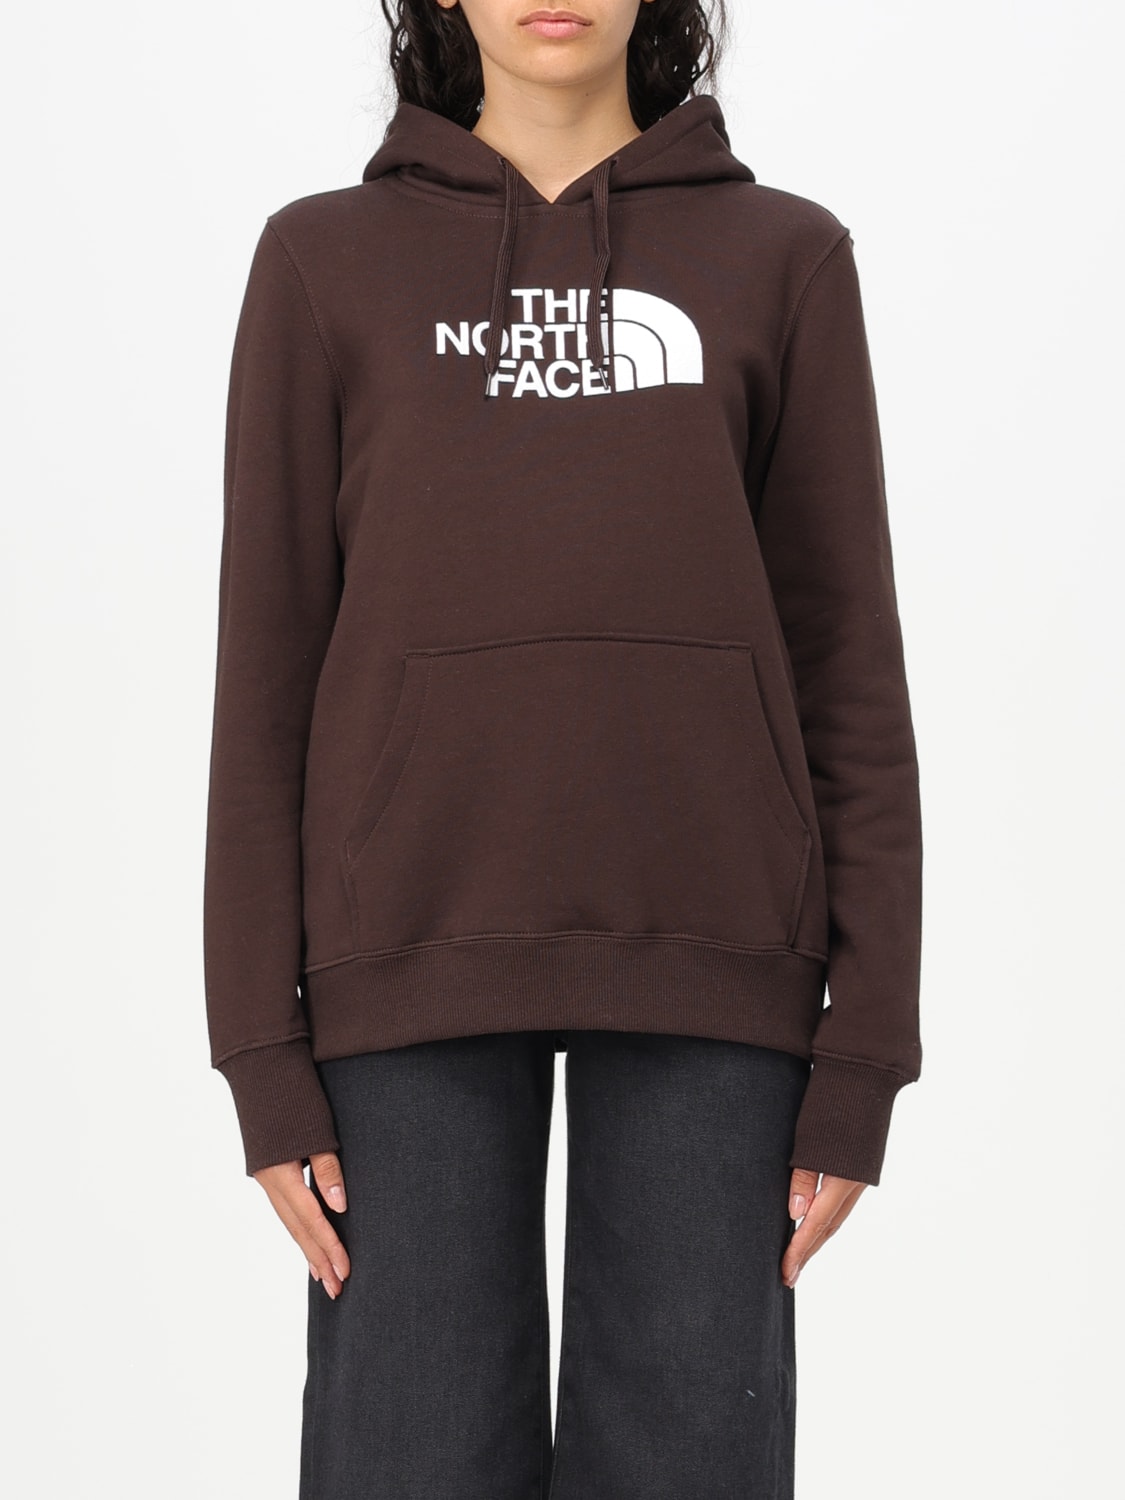 Sweater woman The North Face